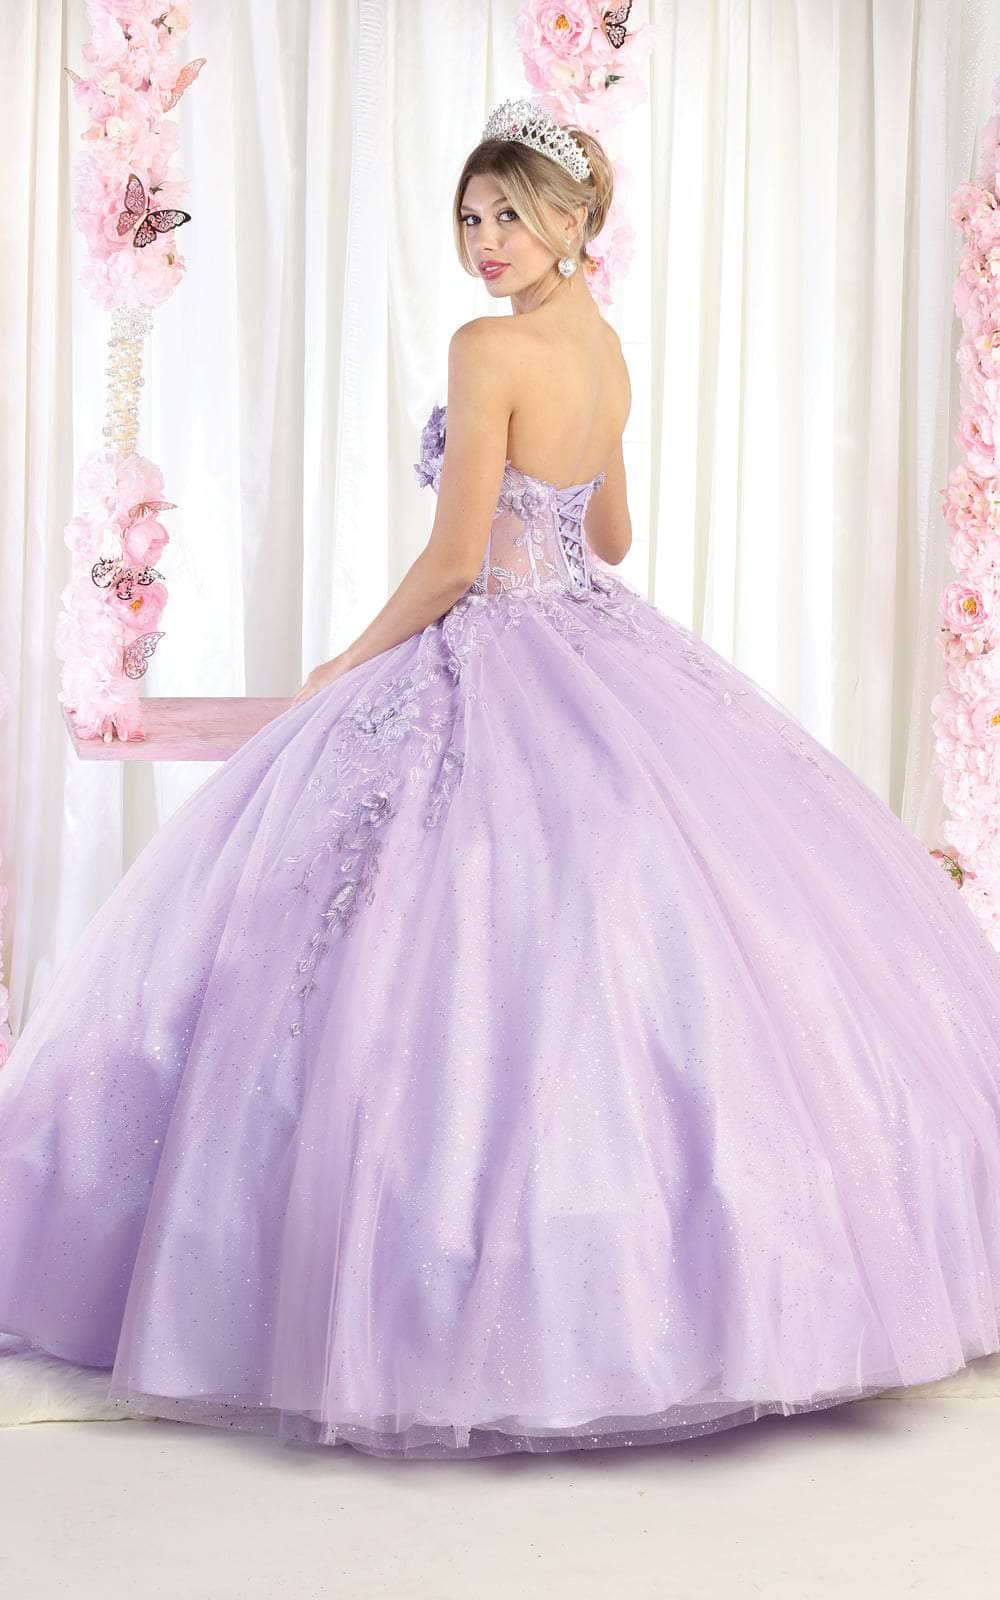 May Queen LK188 - Strapless 3D Floral Embroidered Ballgown Special Occasion Dress